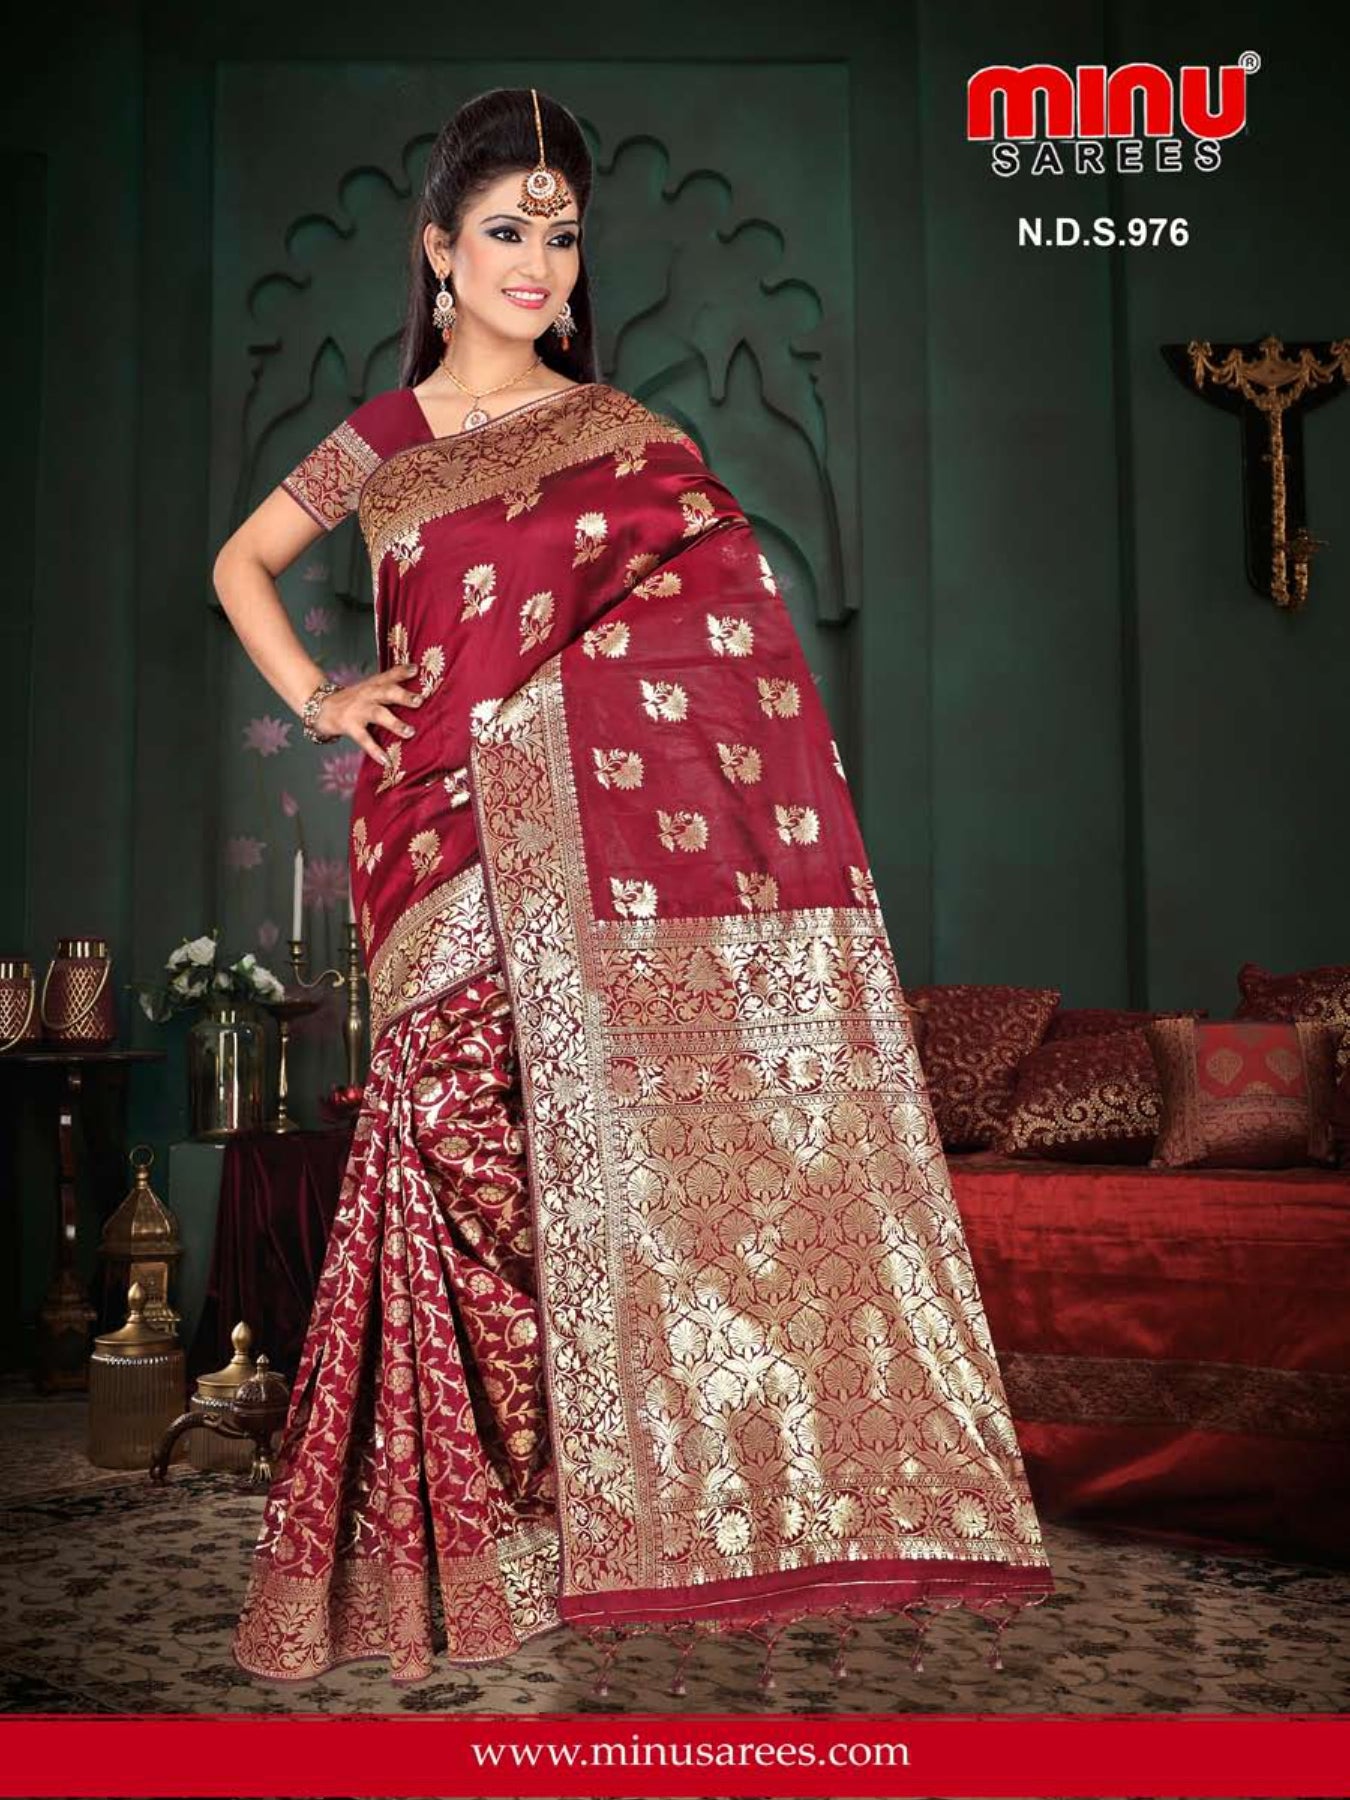 Woman in top-rated fancy saree posing image